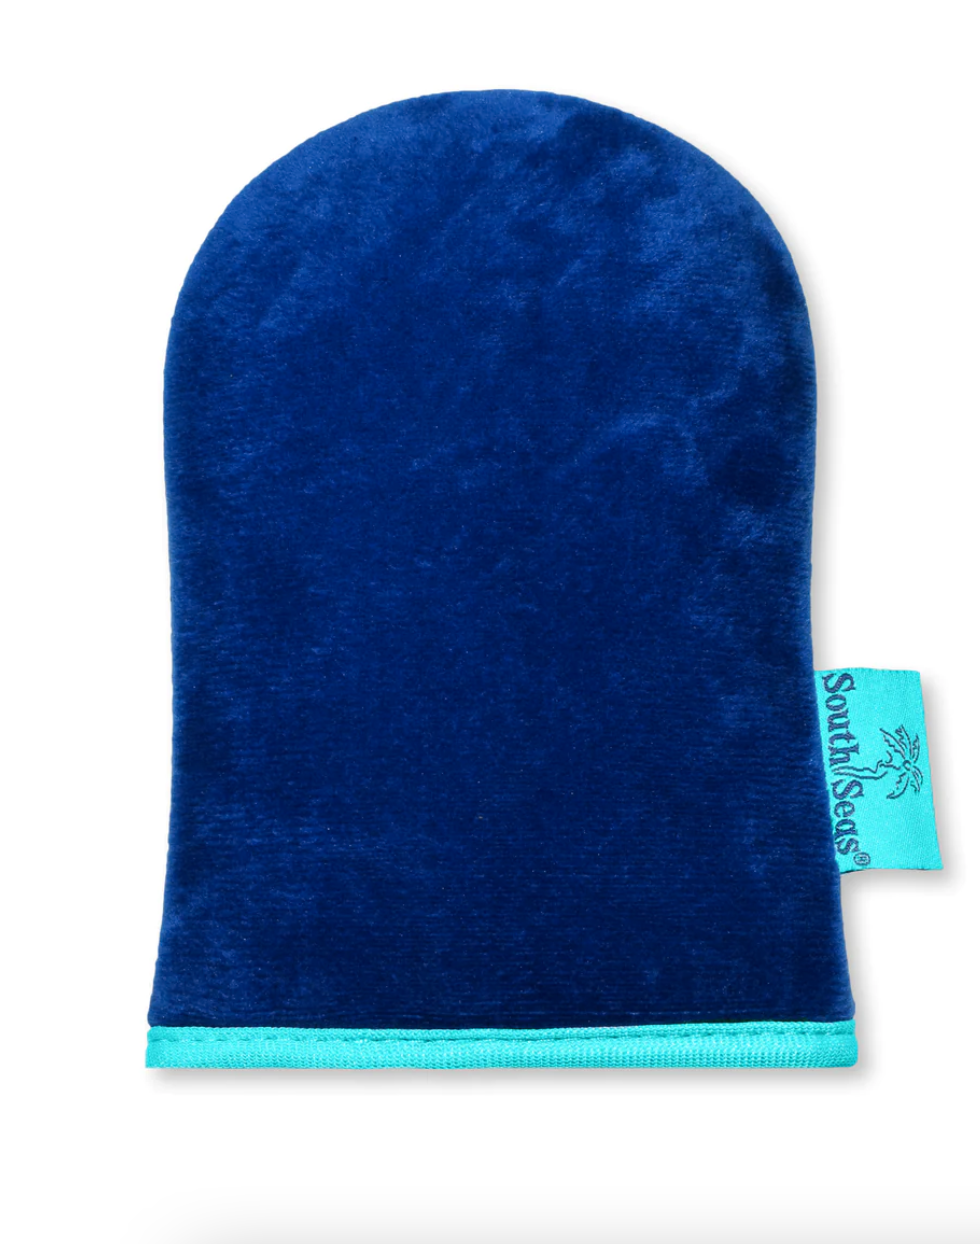 A royal blue Sea Sponge Bronzing Mitt with a bright teal trim and a label reading "South Seas Skincare" attached to the side, displayed against a white Bungalow background.